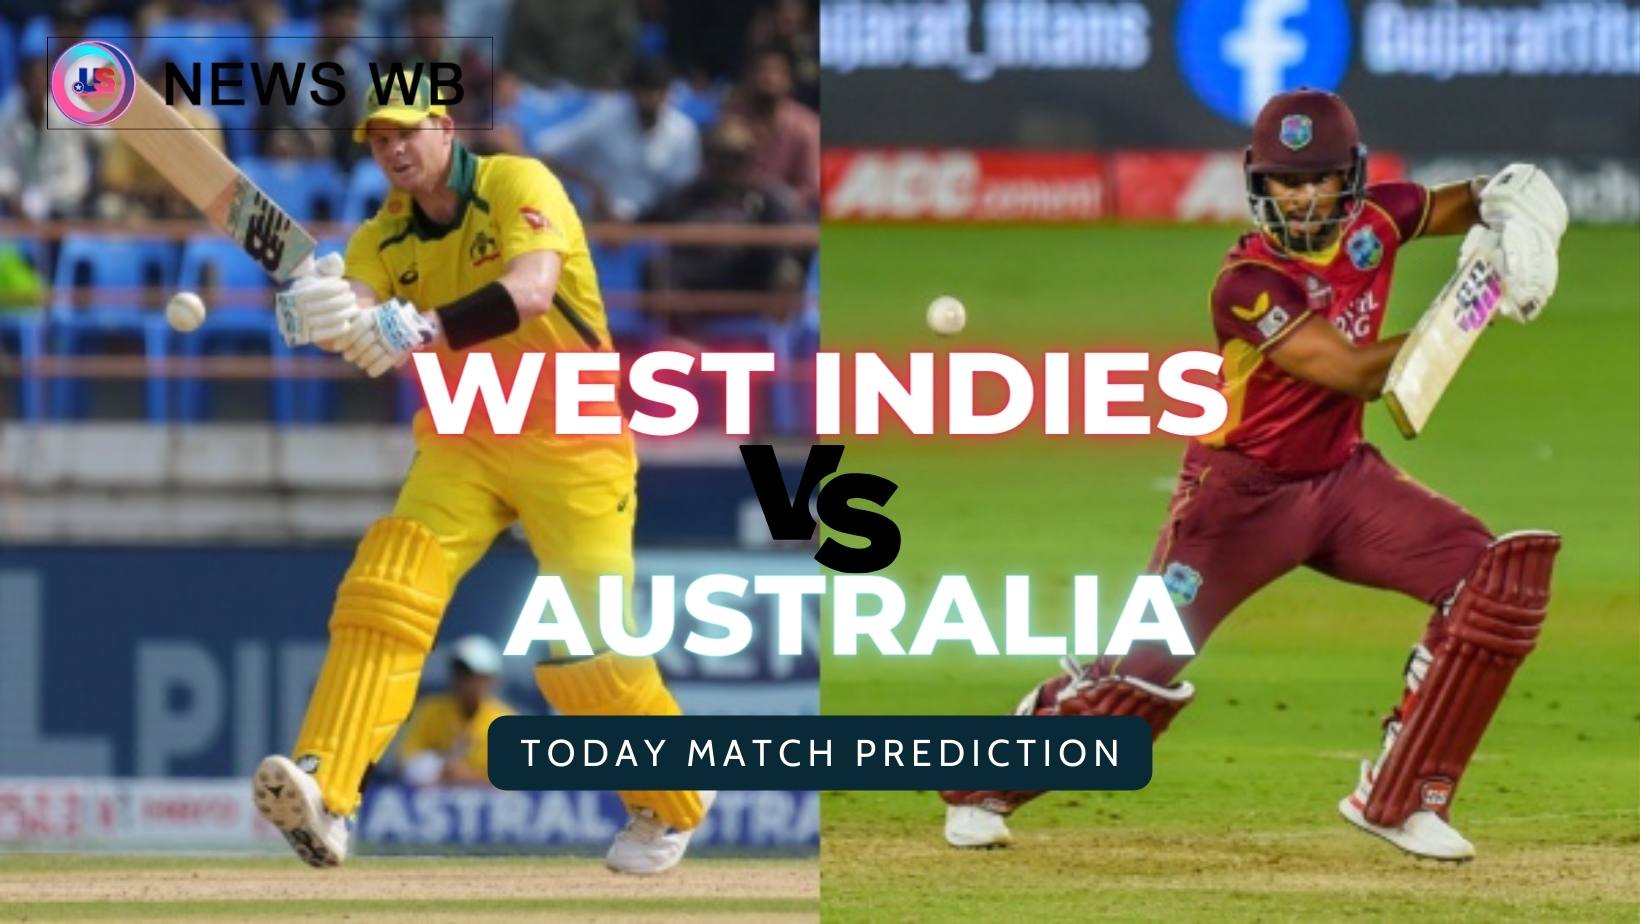 Today Match Prediction: AUS vs WI Dream11 Team, Australia vs West Indies 2nd T20I, Who Will Win?